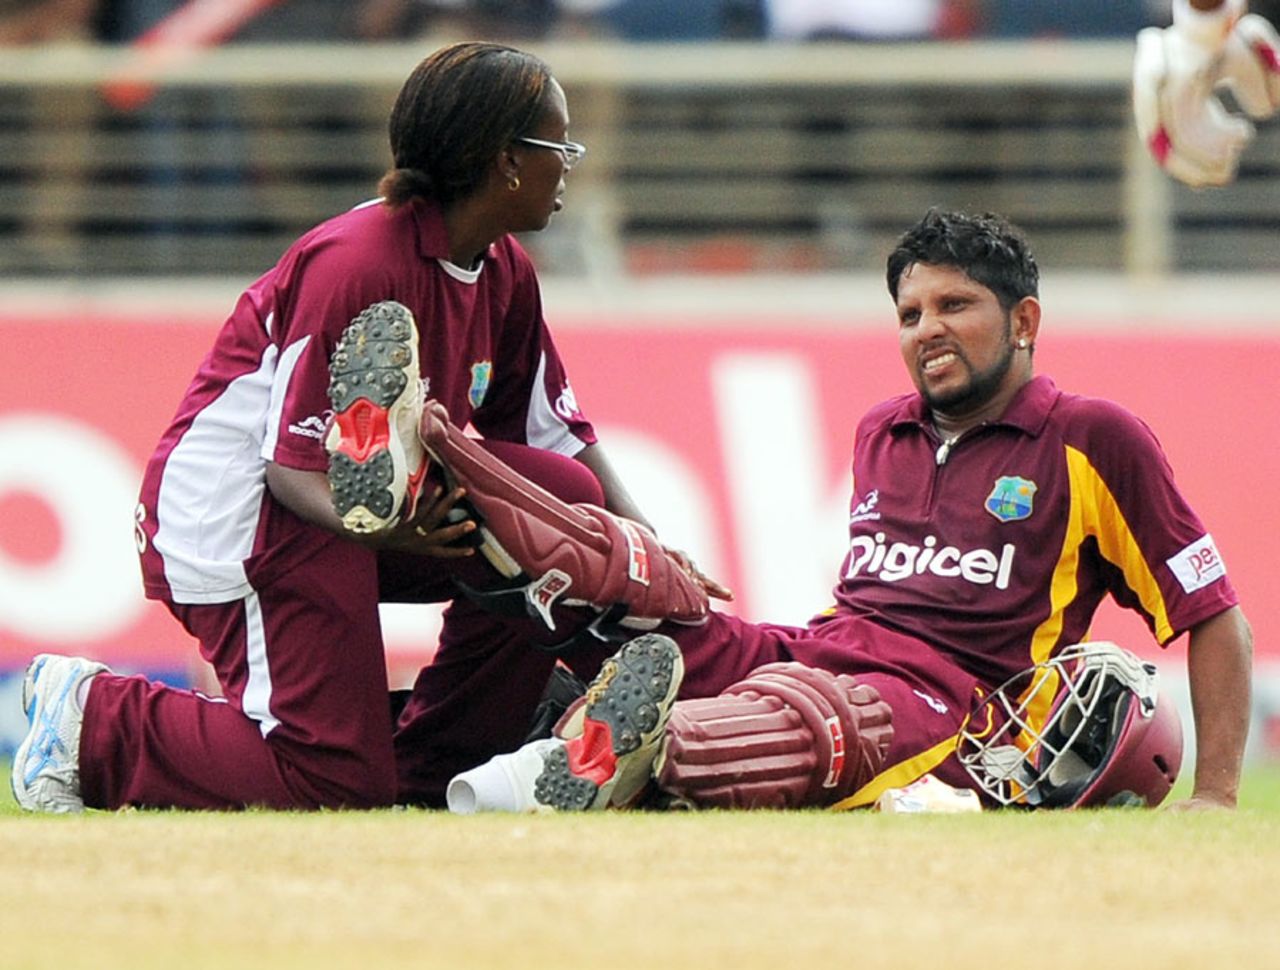 Ramnaresh Sarwan retired hurt on 75 due to severe cramps, West Indies v India, 5th ODI, Kingston, Jamaica, June 16, 2011